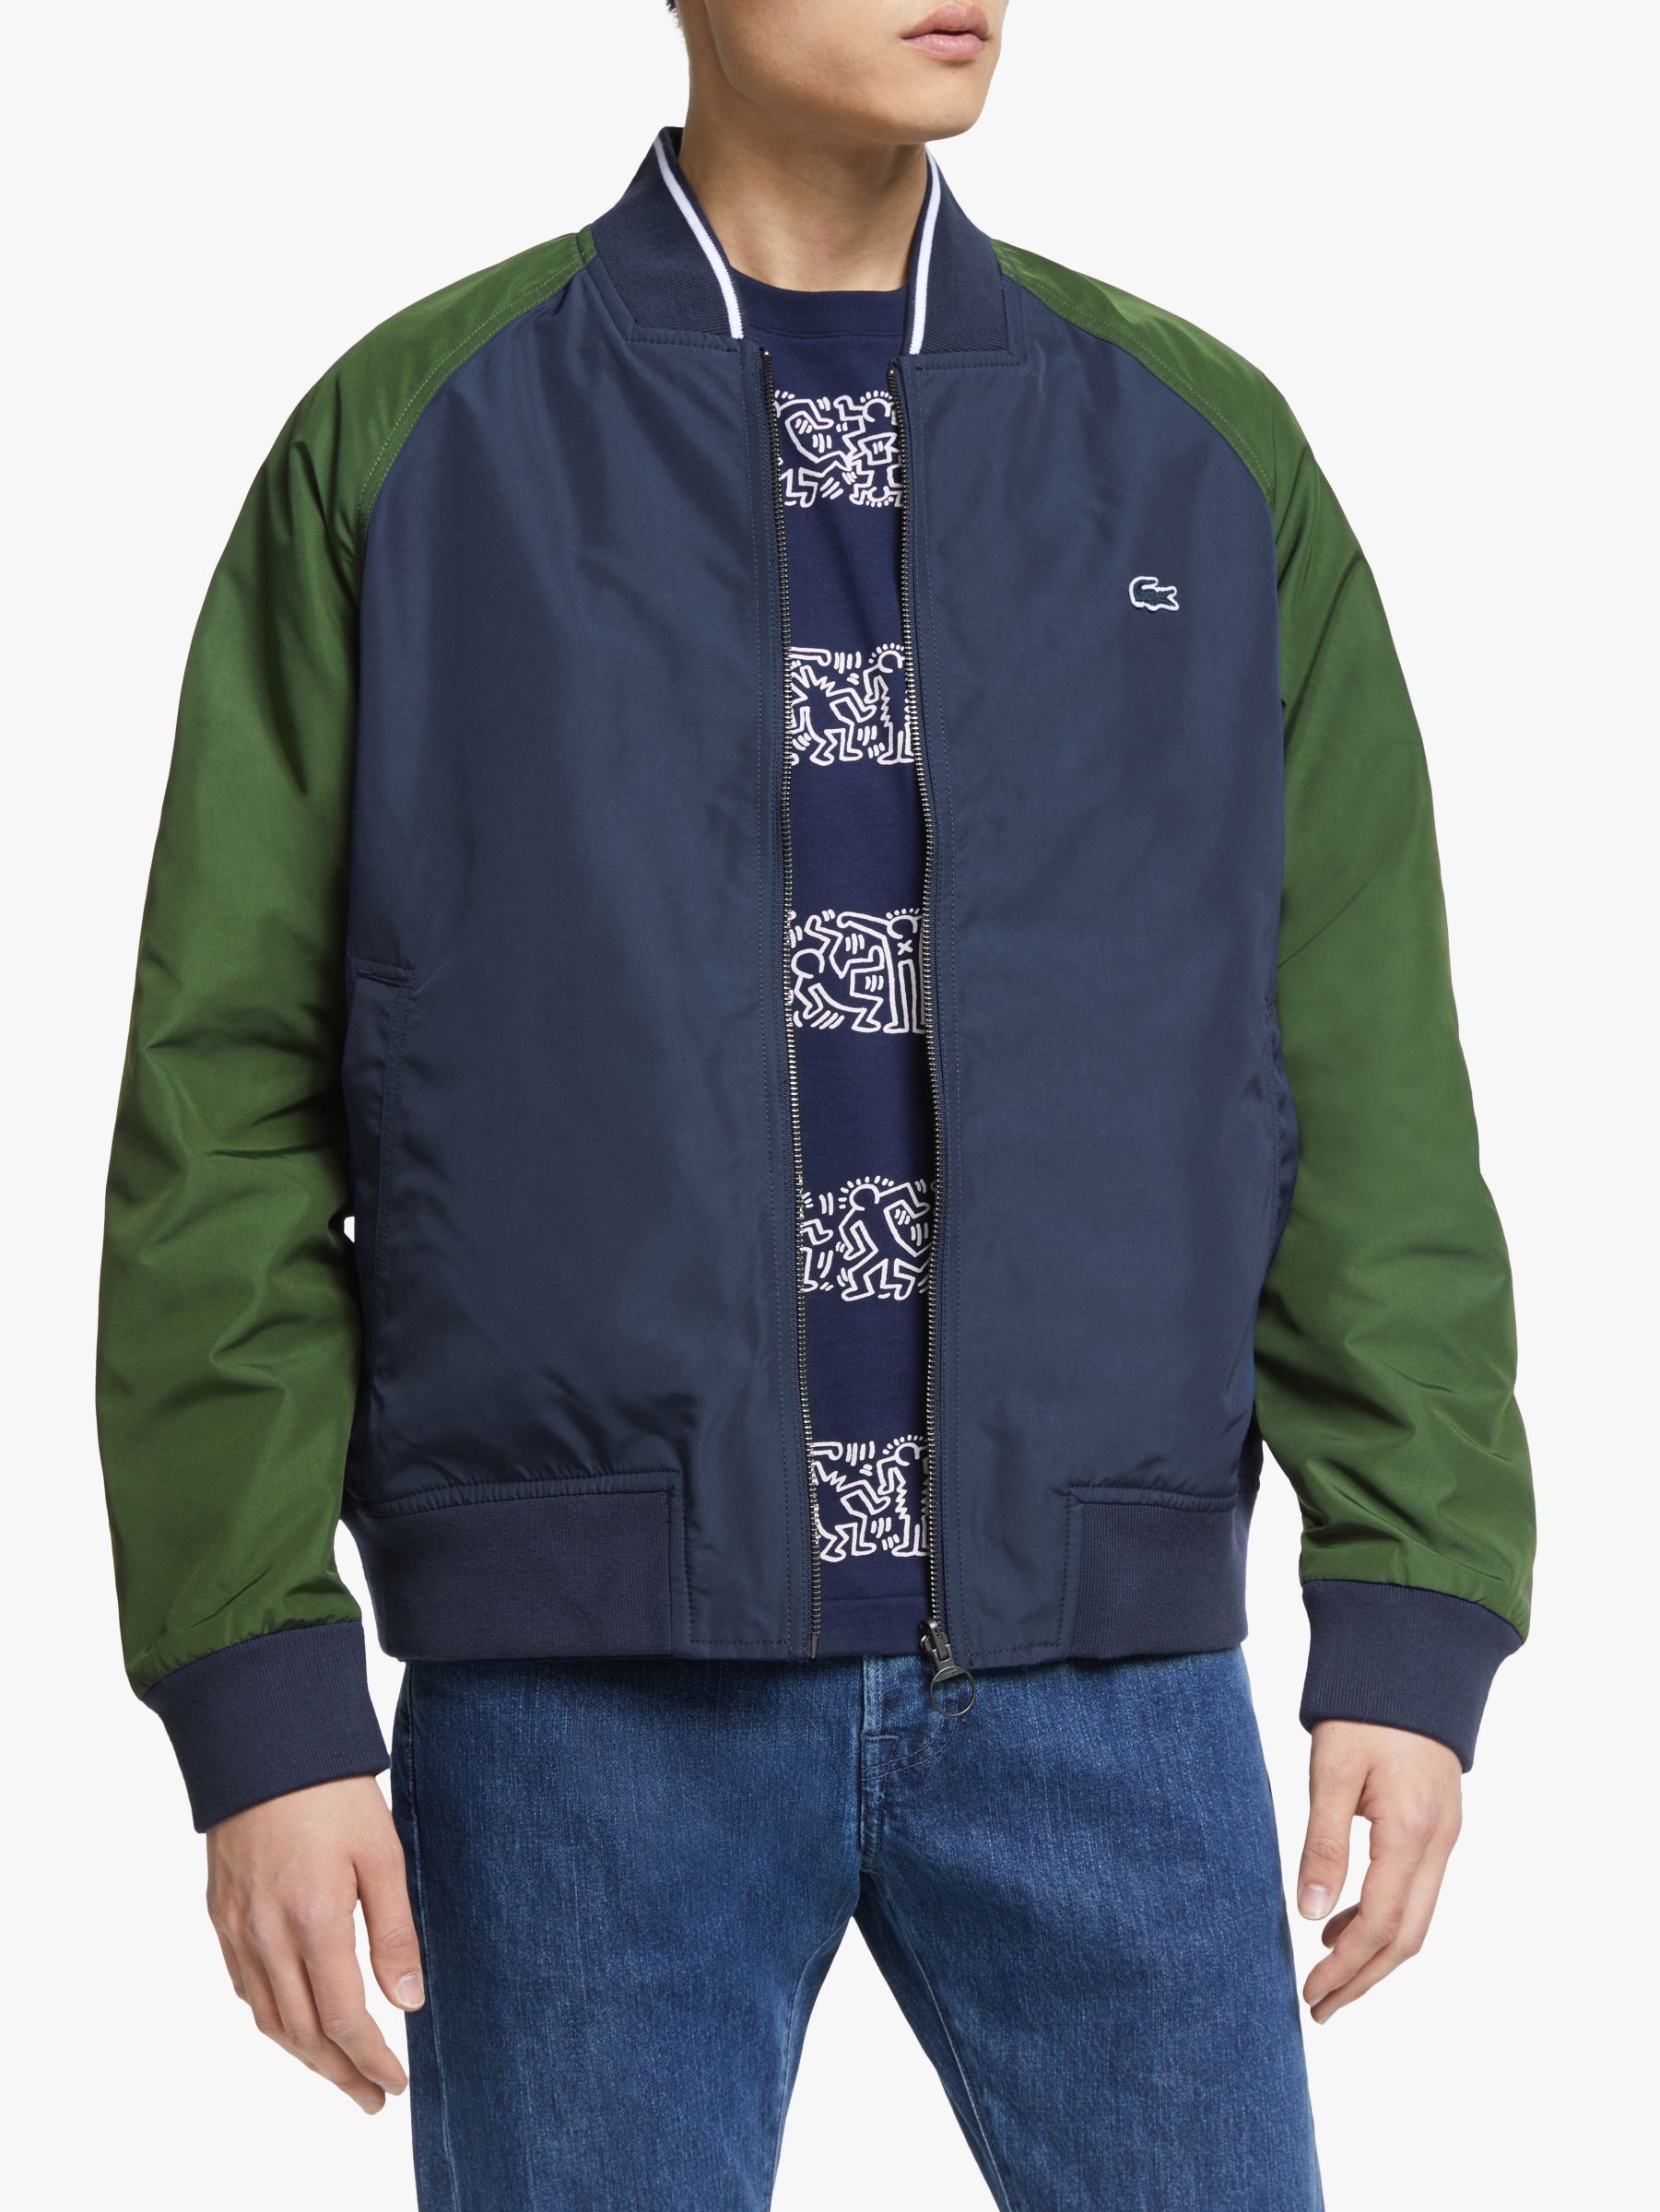 lacoste jackets cheap